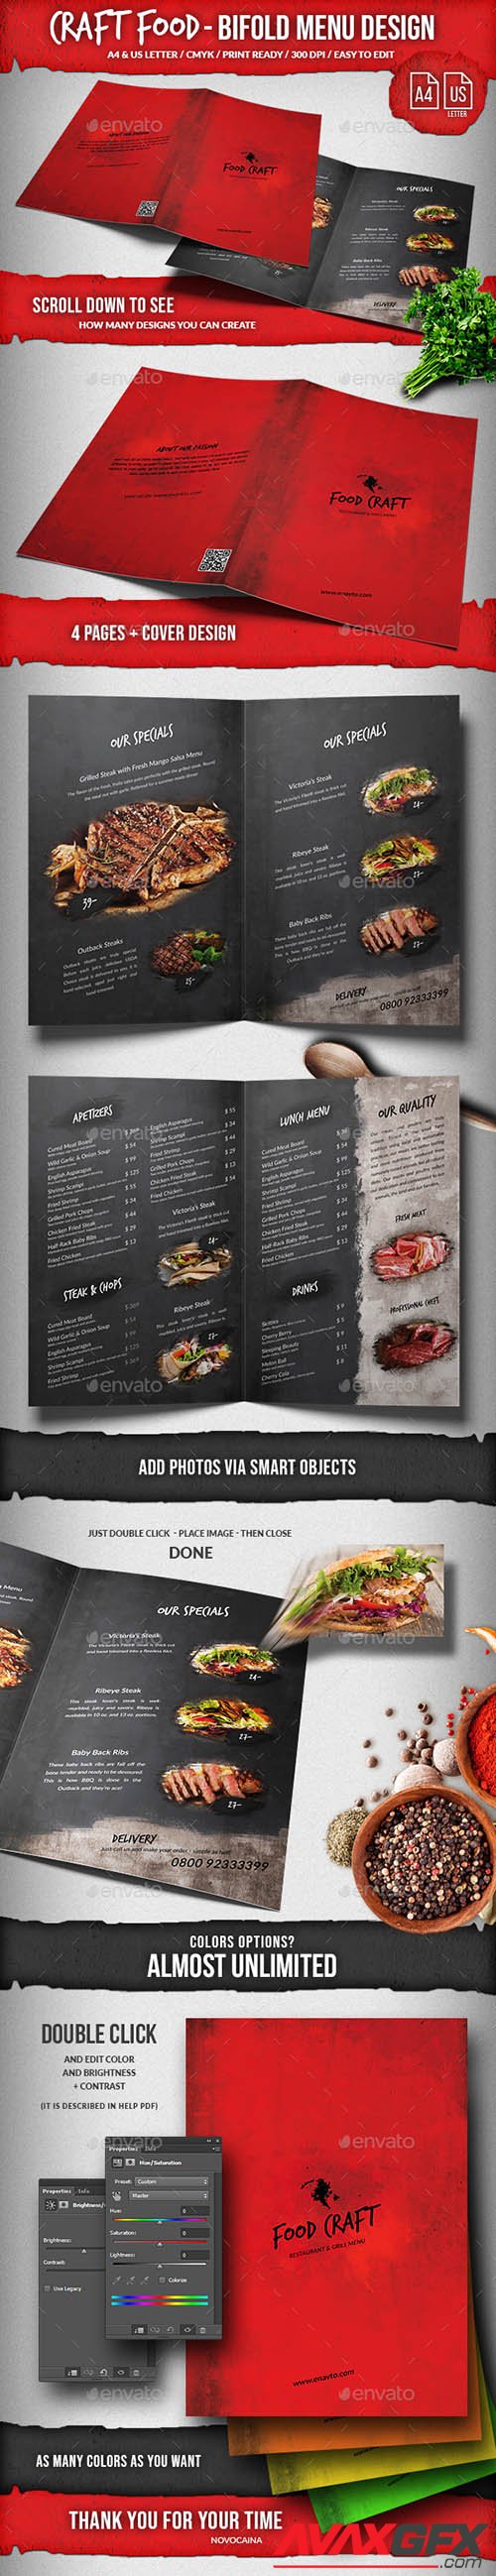 Graphicriver - Craft Food Bifold Menu - A4 & US Letter. Very Editable. 21980762